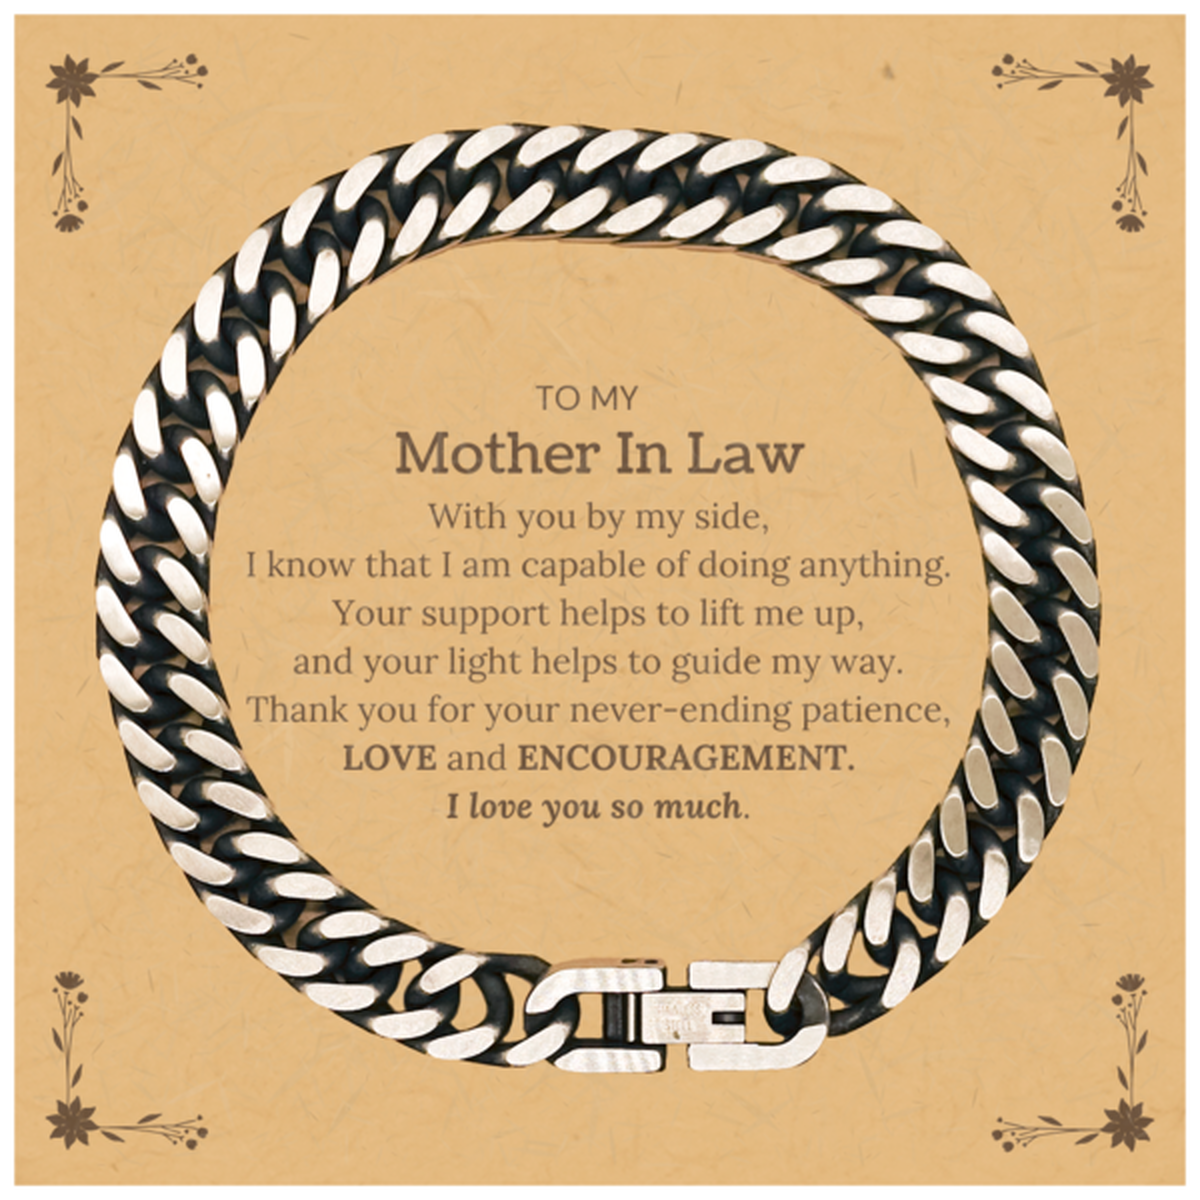 Appreciation Mother In Law Cuban Link Chain Bracelet Gifts, To My Mother In Law Birthday Christmas Wedding Keepsake Gifts for Mother In Law With you by my side, I know that I am capable of doing anything. I love you so much